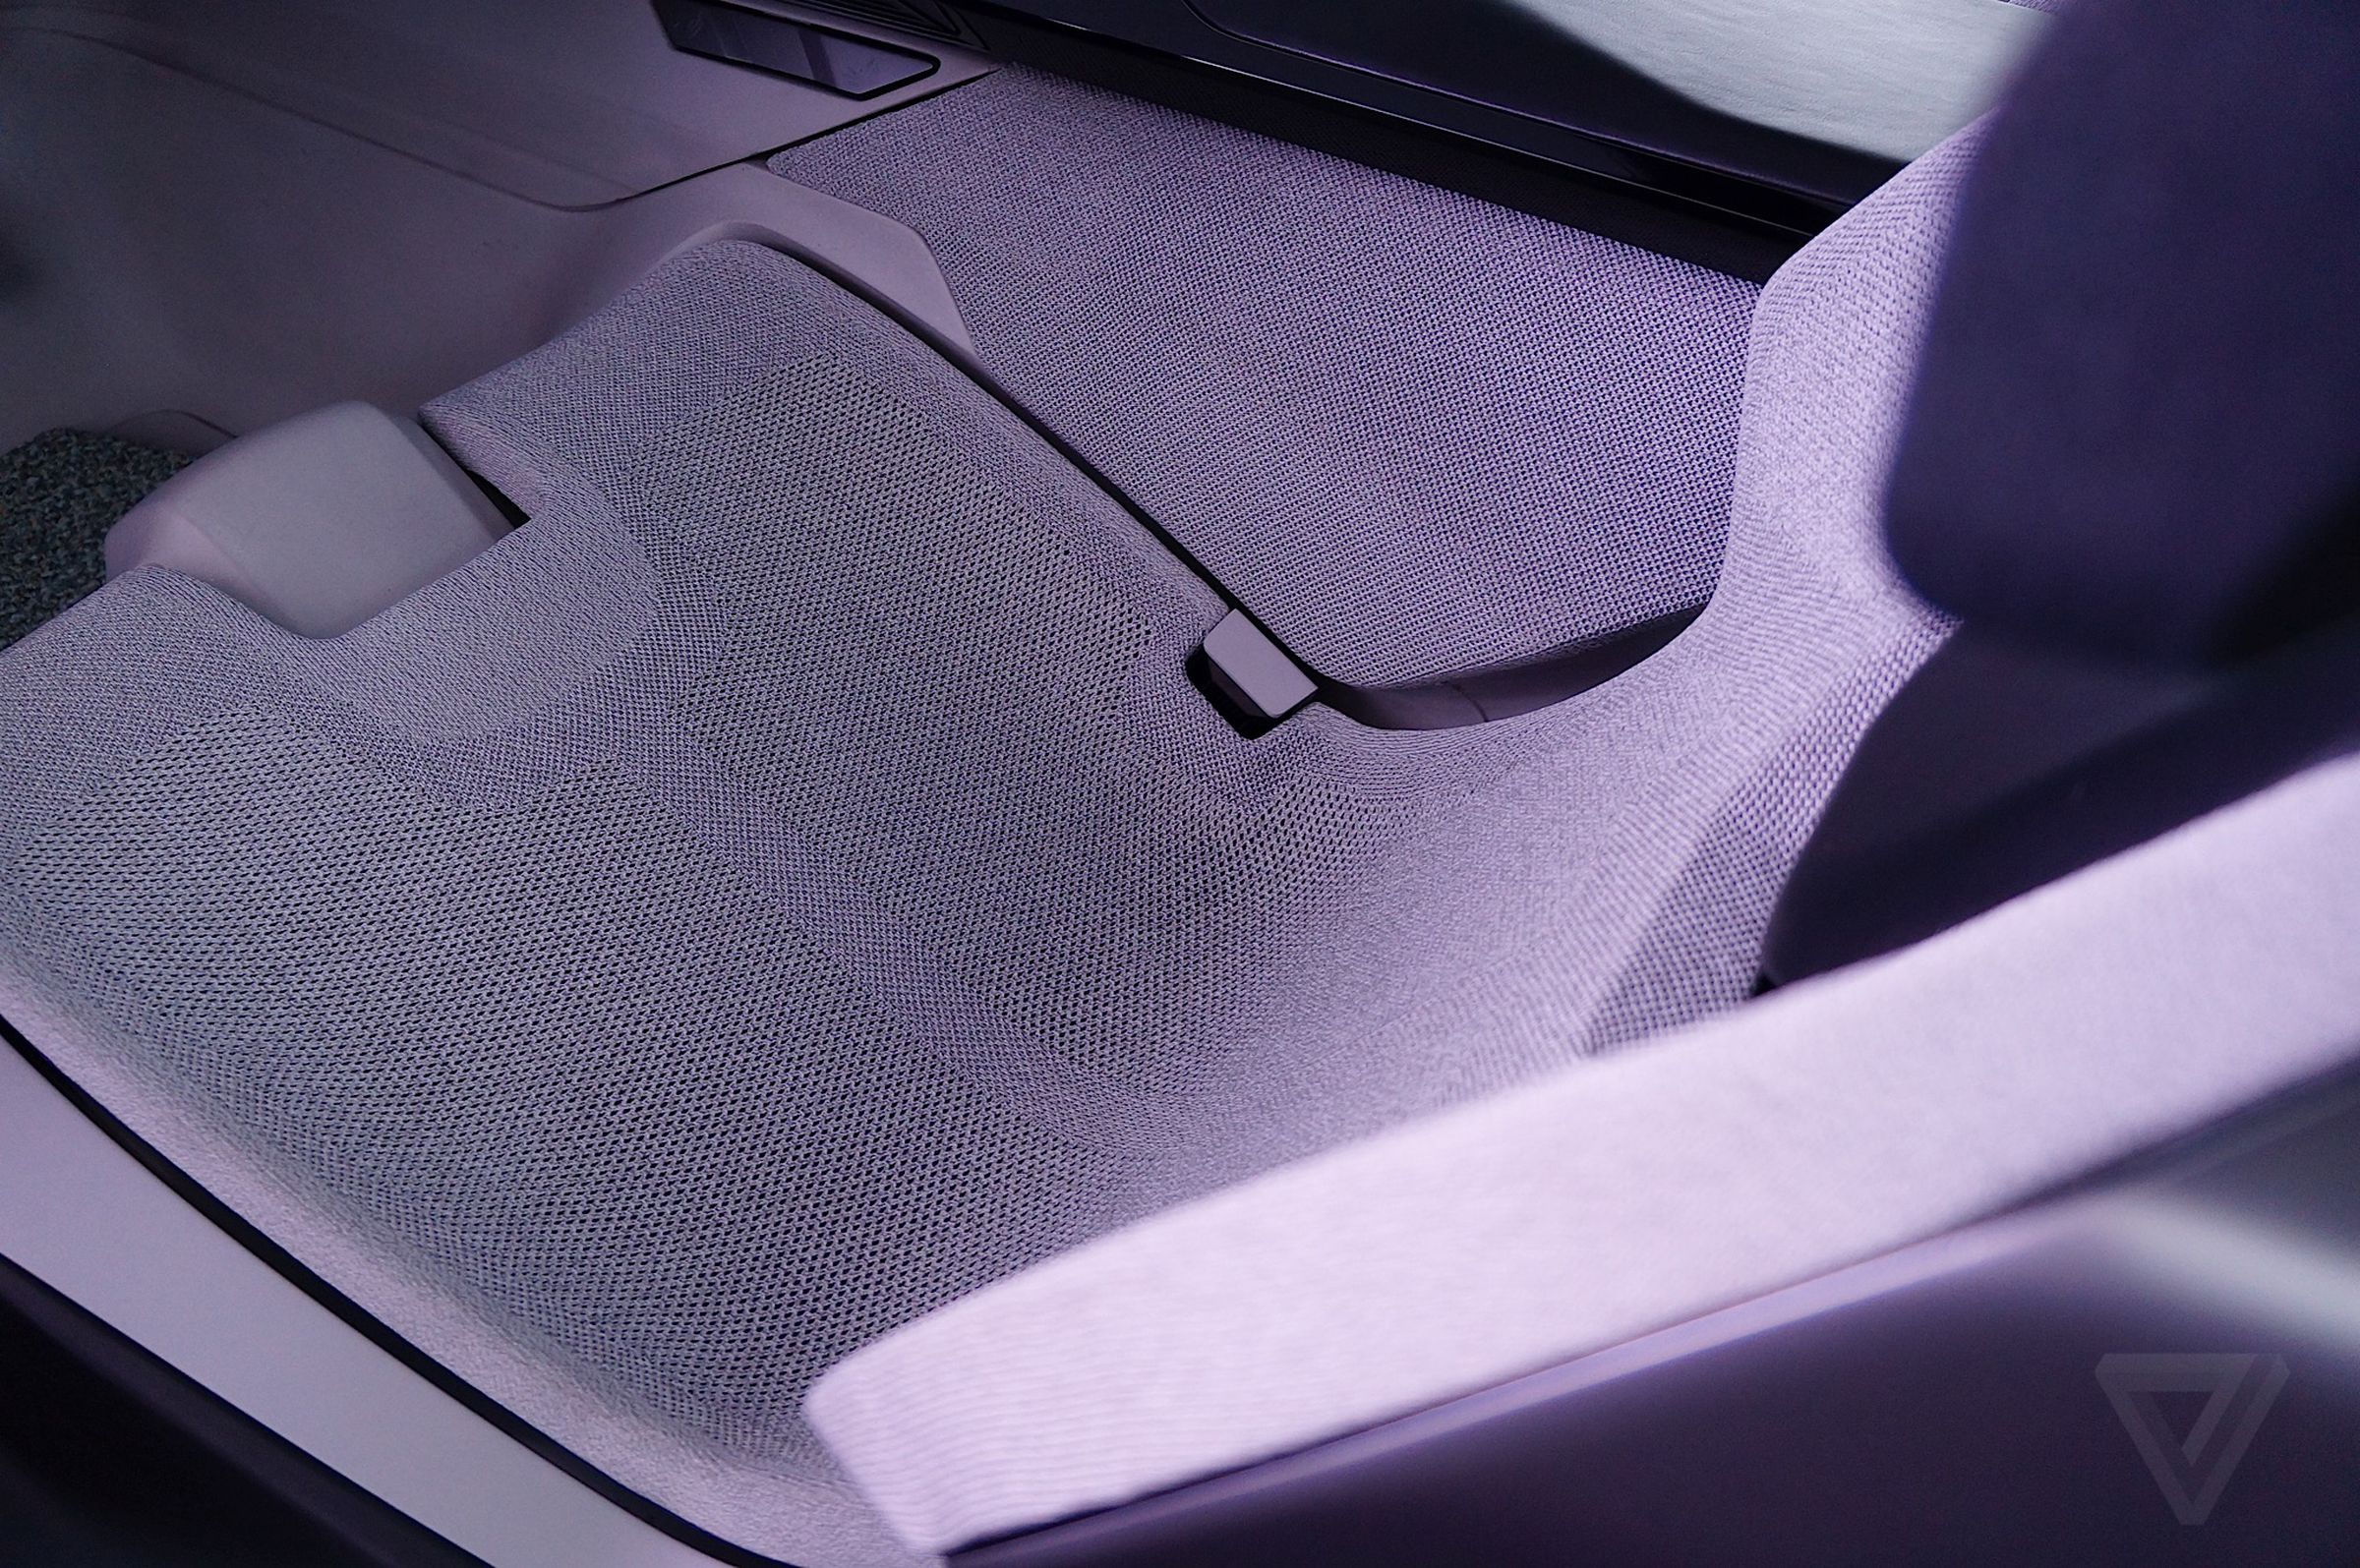 The Instinct’s mesh seats are designed to adapt to the contours of a passenger’s body. 